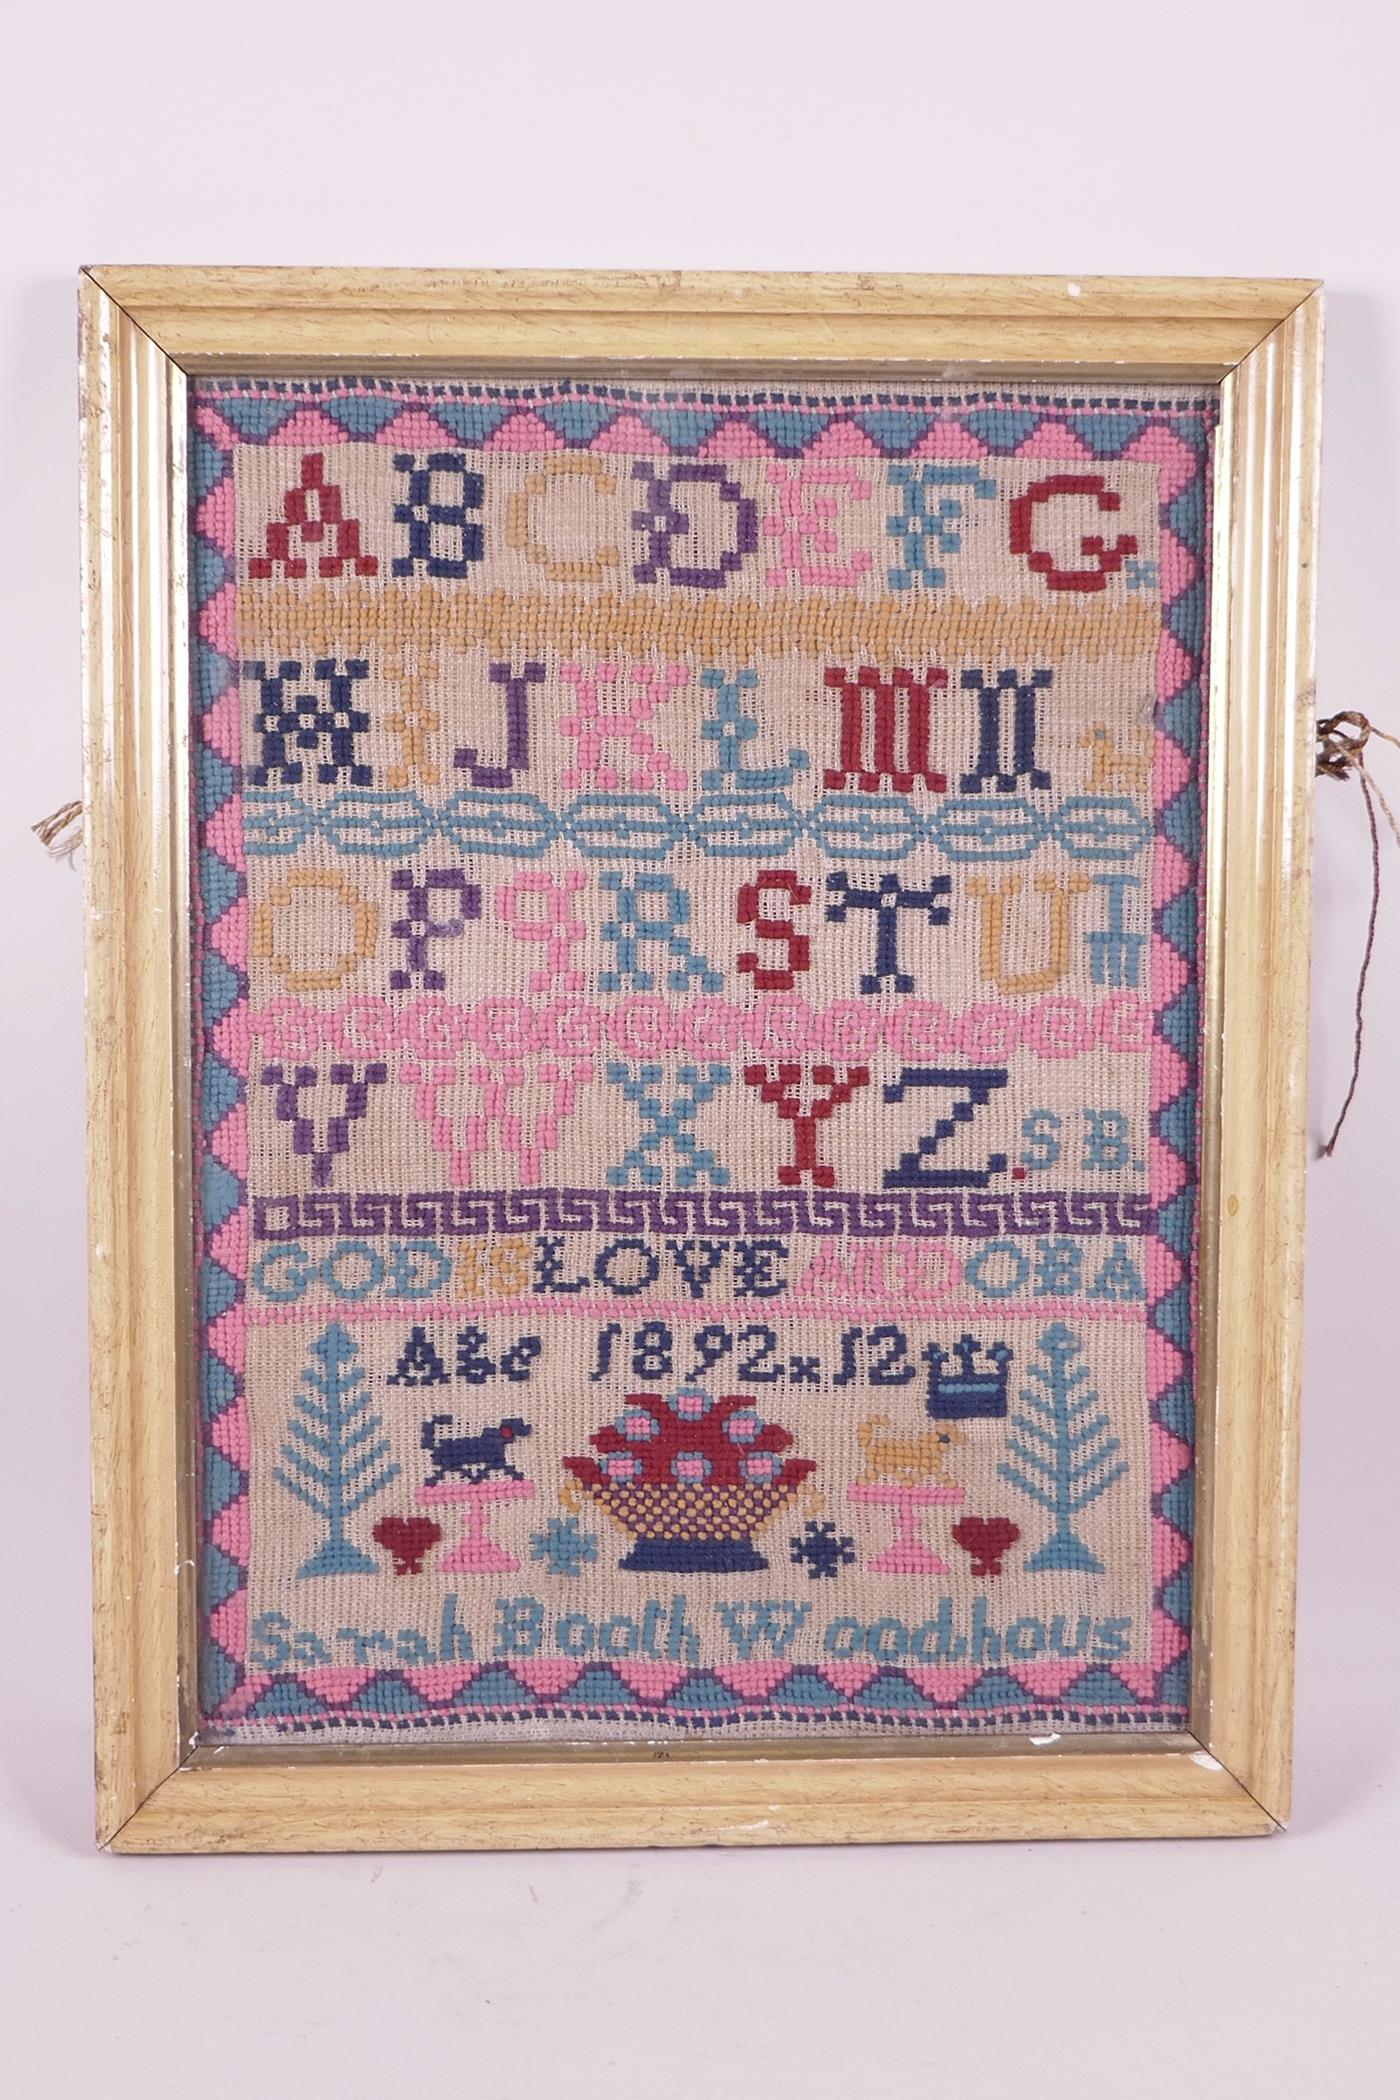 A C19th wool sampler, signed Sarah Booth Woodhaus, age 12, dated 1892, 12" x 16"